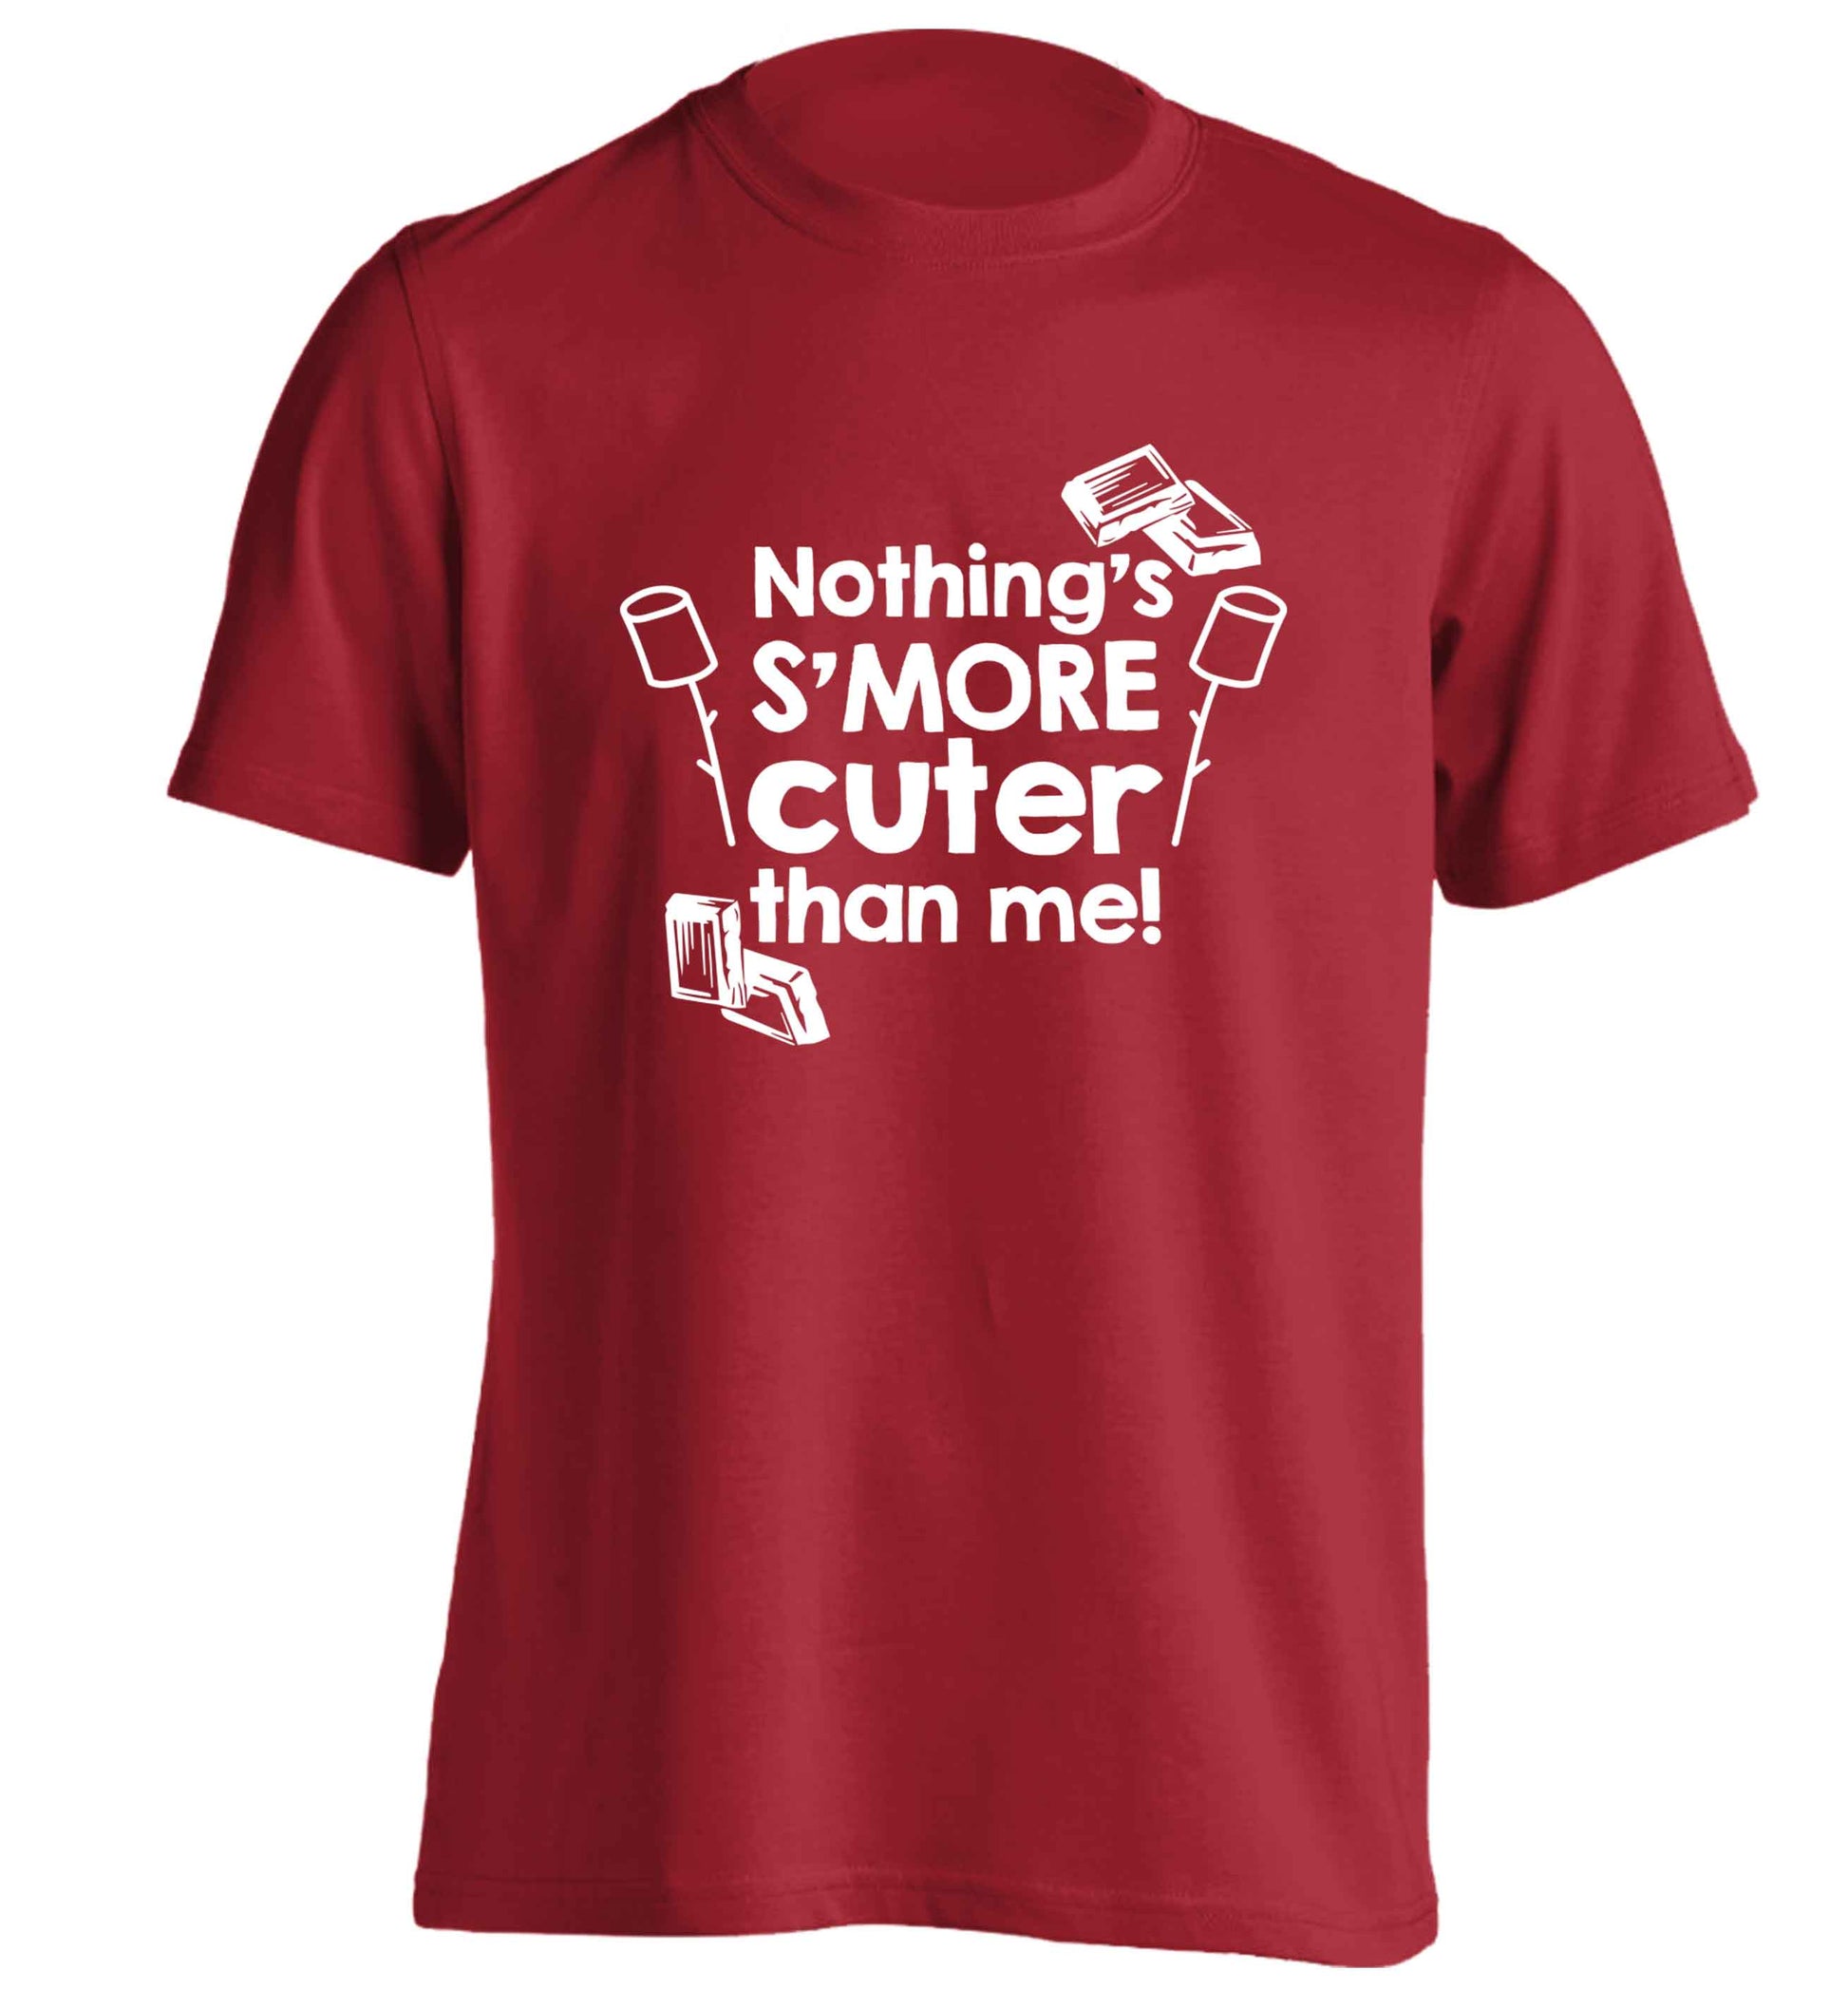 Nothing's s'more cuter than me! adults unisex red Tshirt 2XL